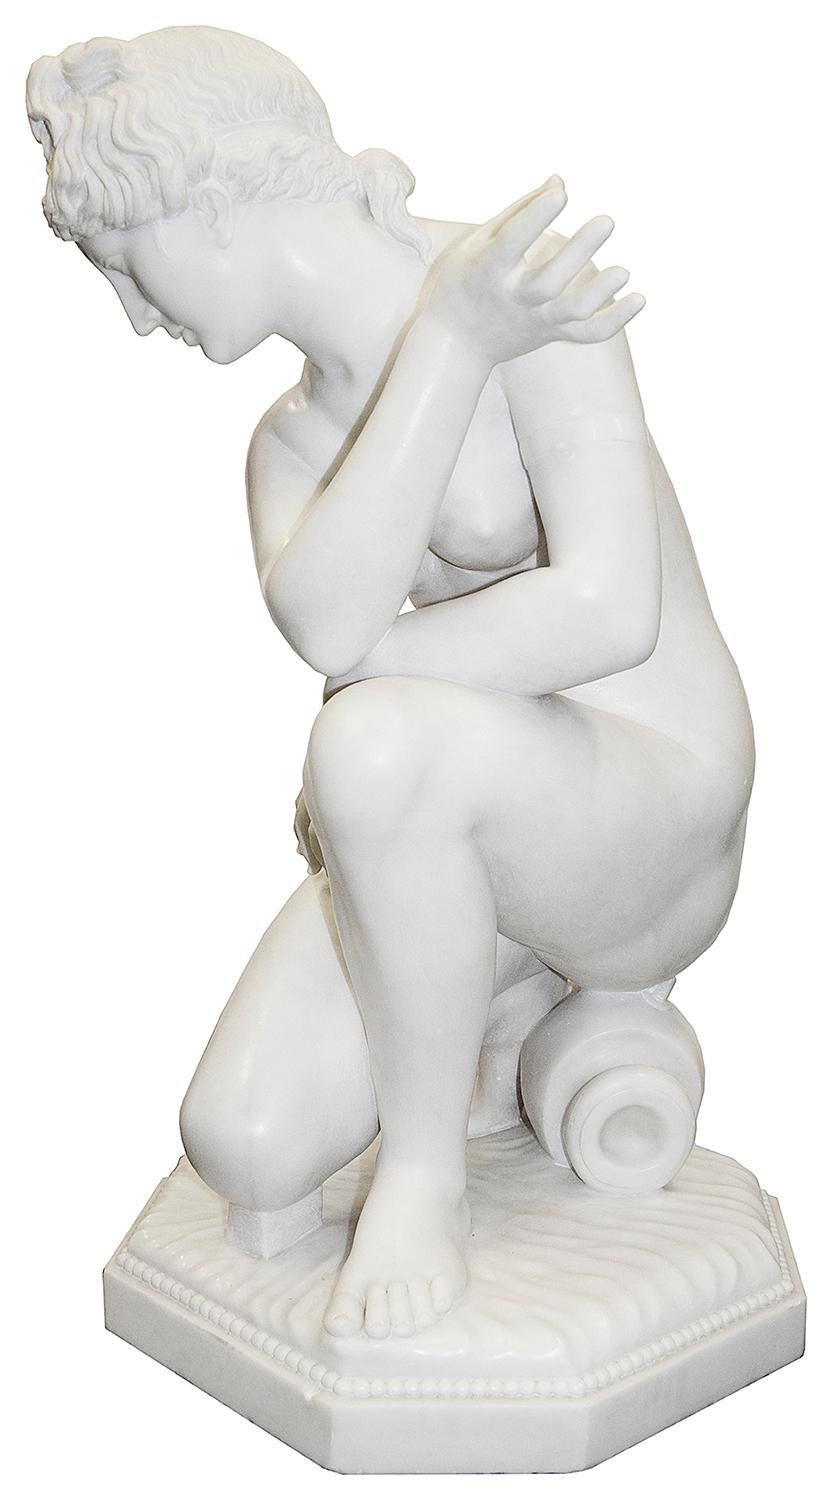 A fine quality late 19th century carrera marble statue of ' Crouching Venus'.

Marble statue of a naked Aphrodite crouching at her bath, also known as Lely’s Venus.

After the Greek original, 2nd century AD. 

